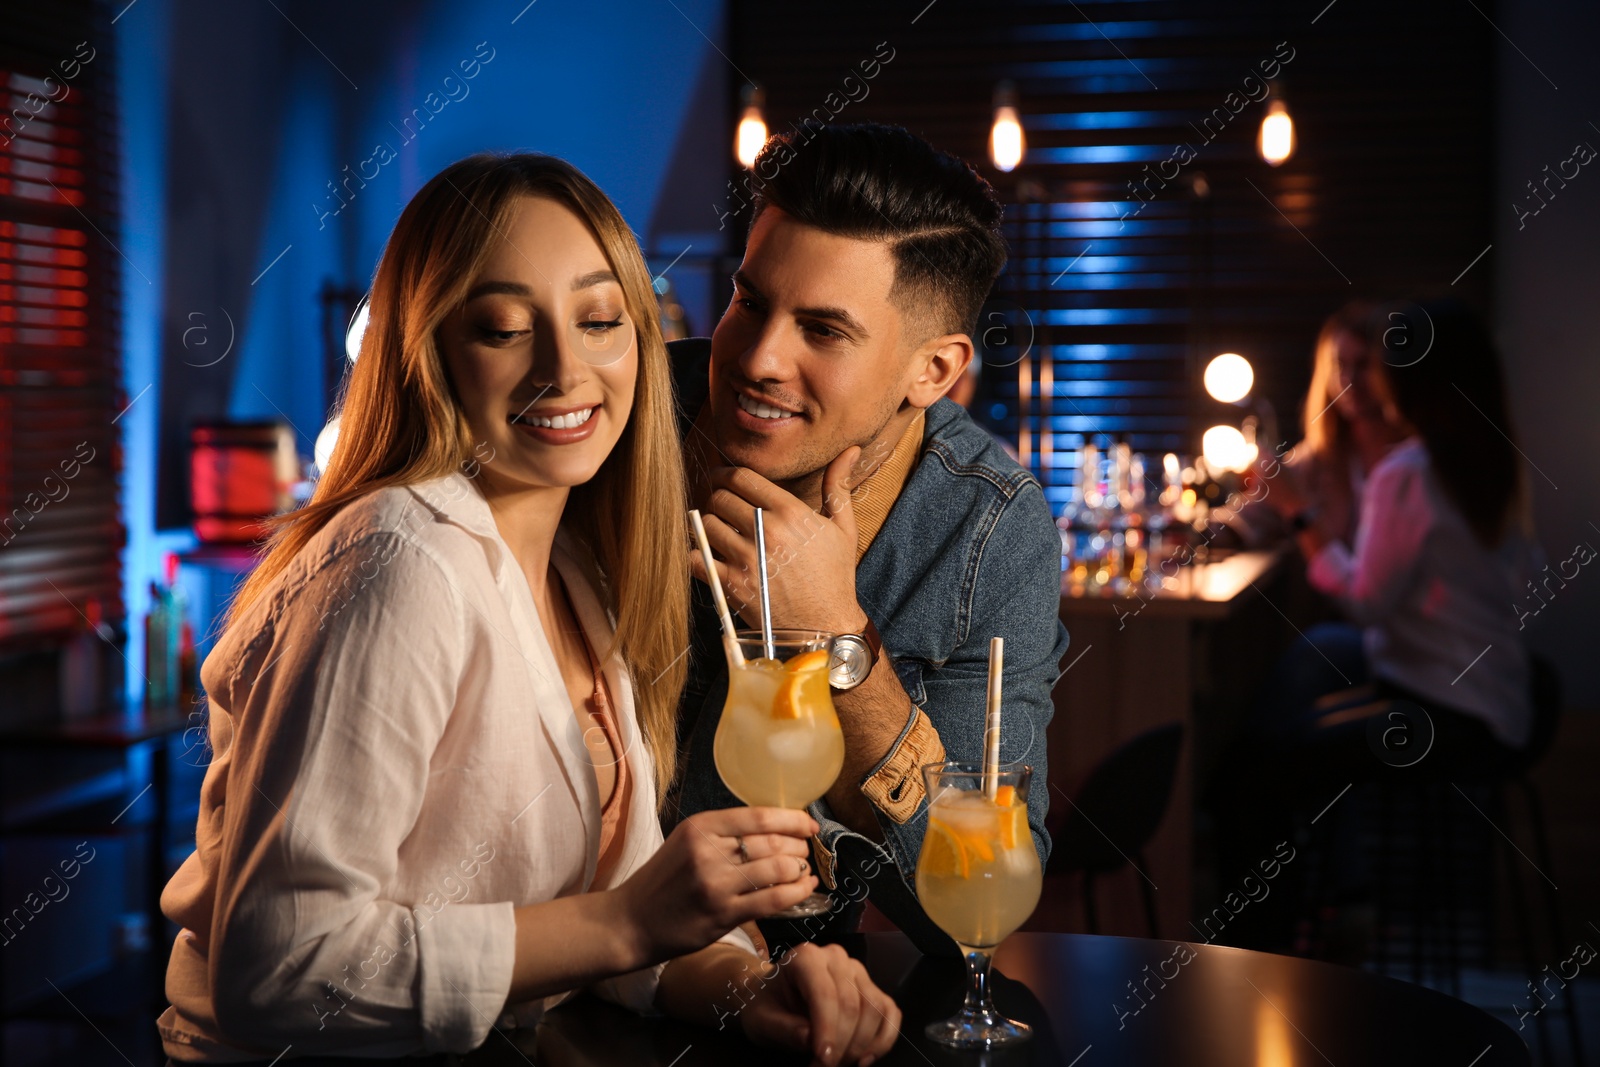 Photo of Man and woman flirting with each other in bar